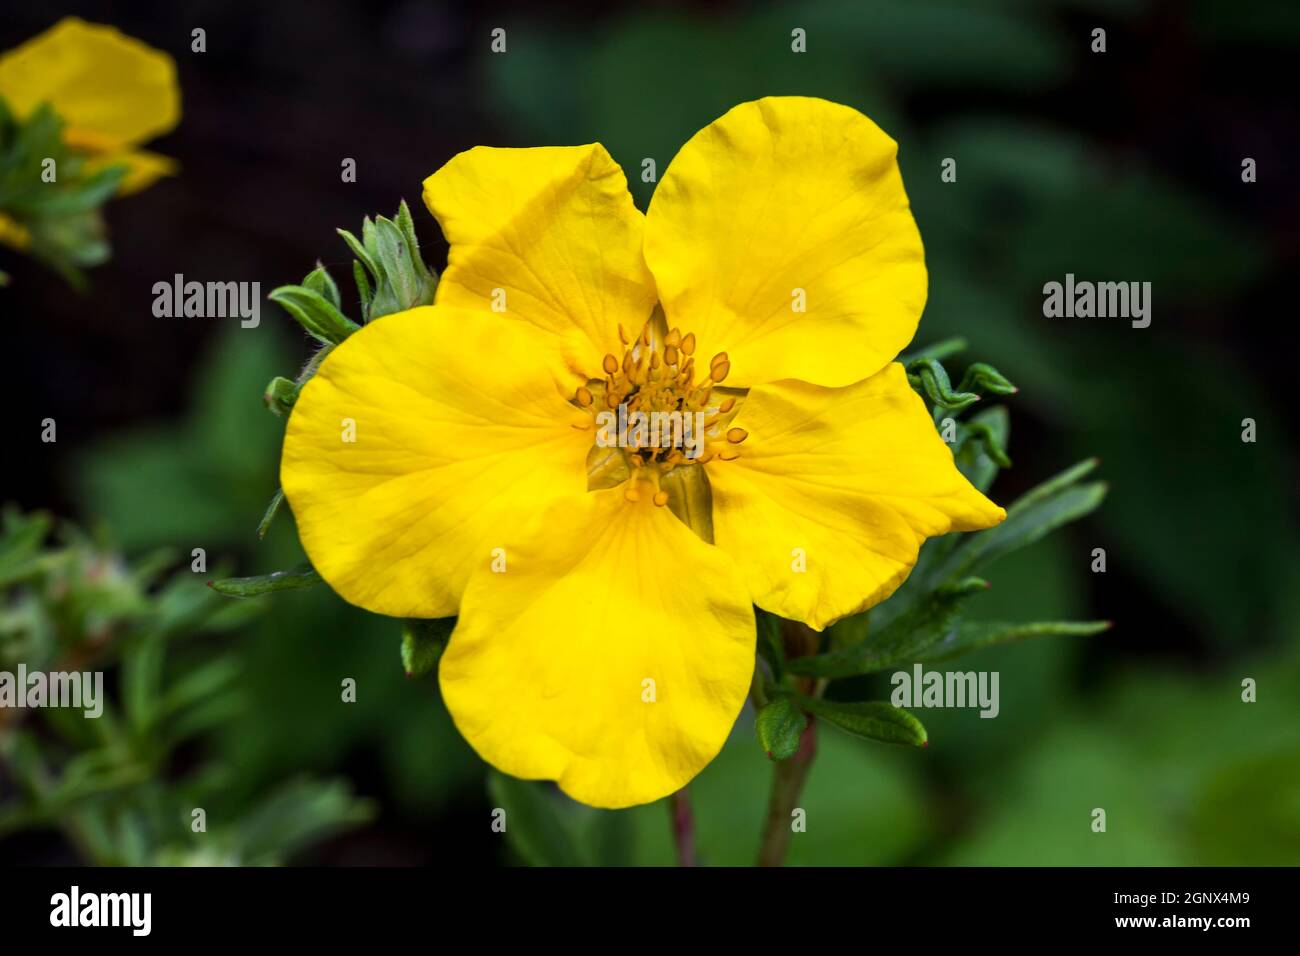 Potentilla 'Goldfinger' a yellow flowered plant known as cinquefoil Stock Photo